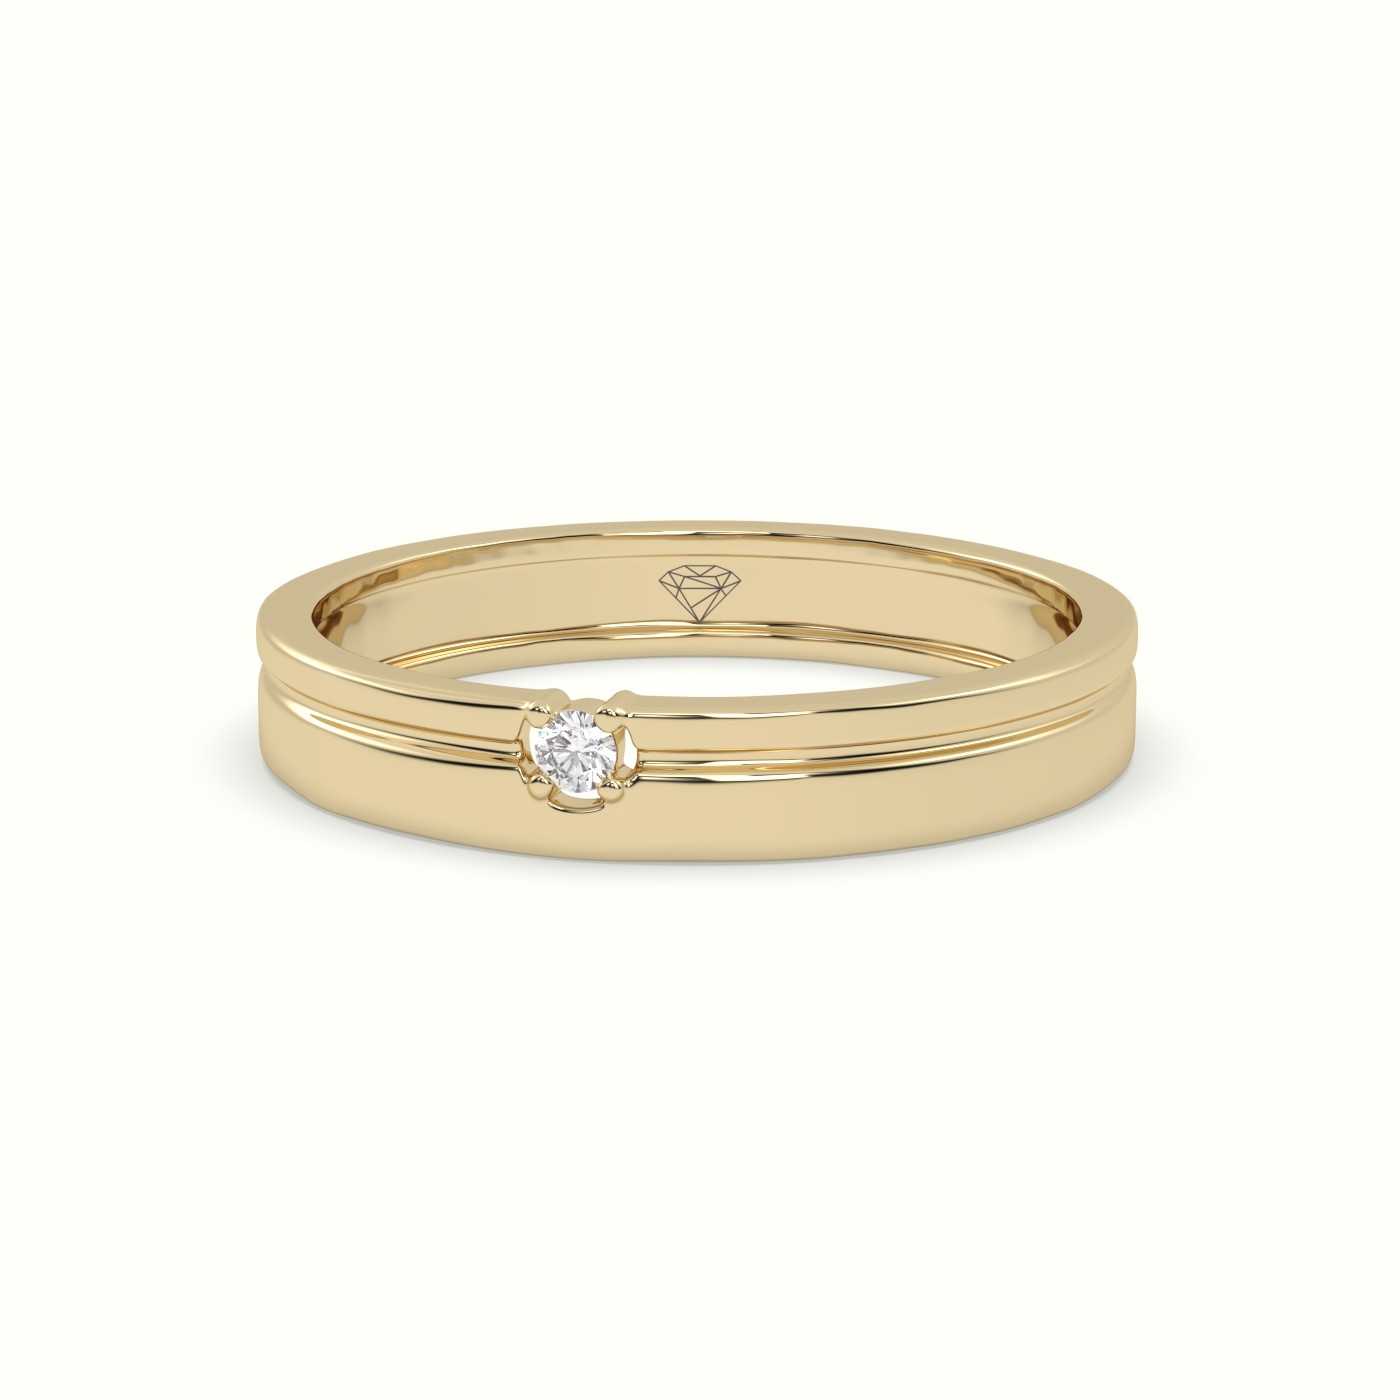 Buy quality 916 Gold Single Stone Couple Ring PJ-R008 in Ahmedabad